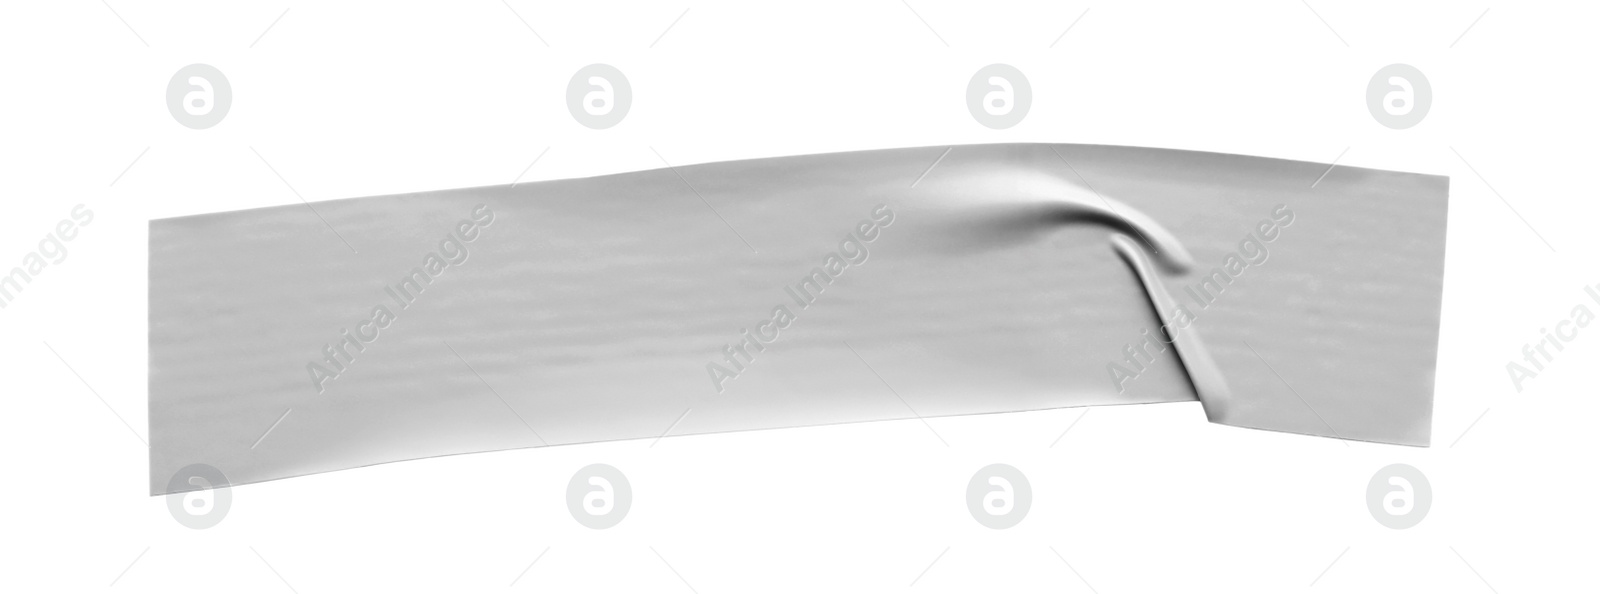 Photo of Piece of grey insulating tape isolated on white, top view